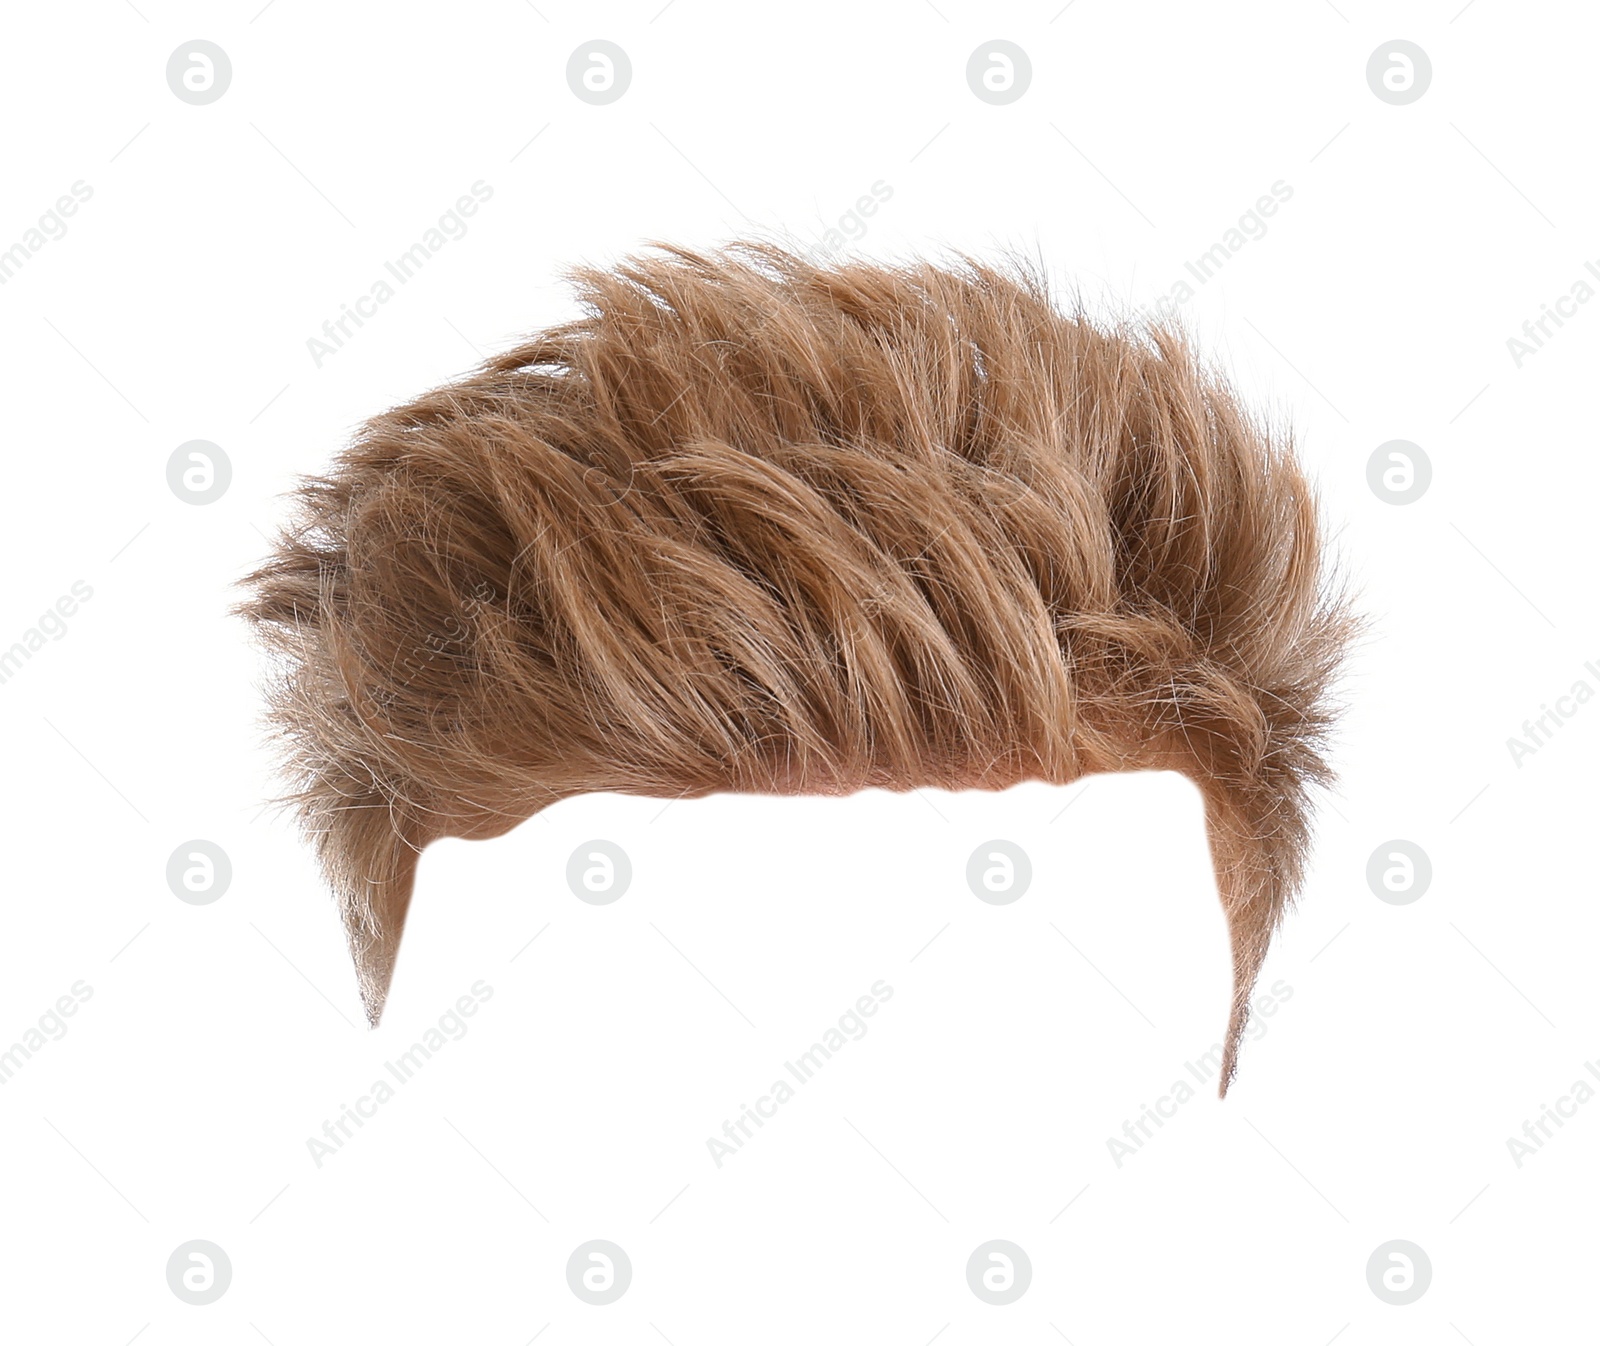 Image of Fashionable men's hairstyle isolated on white. Image for design